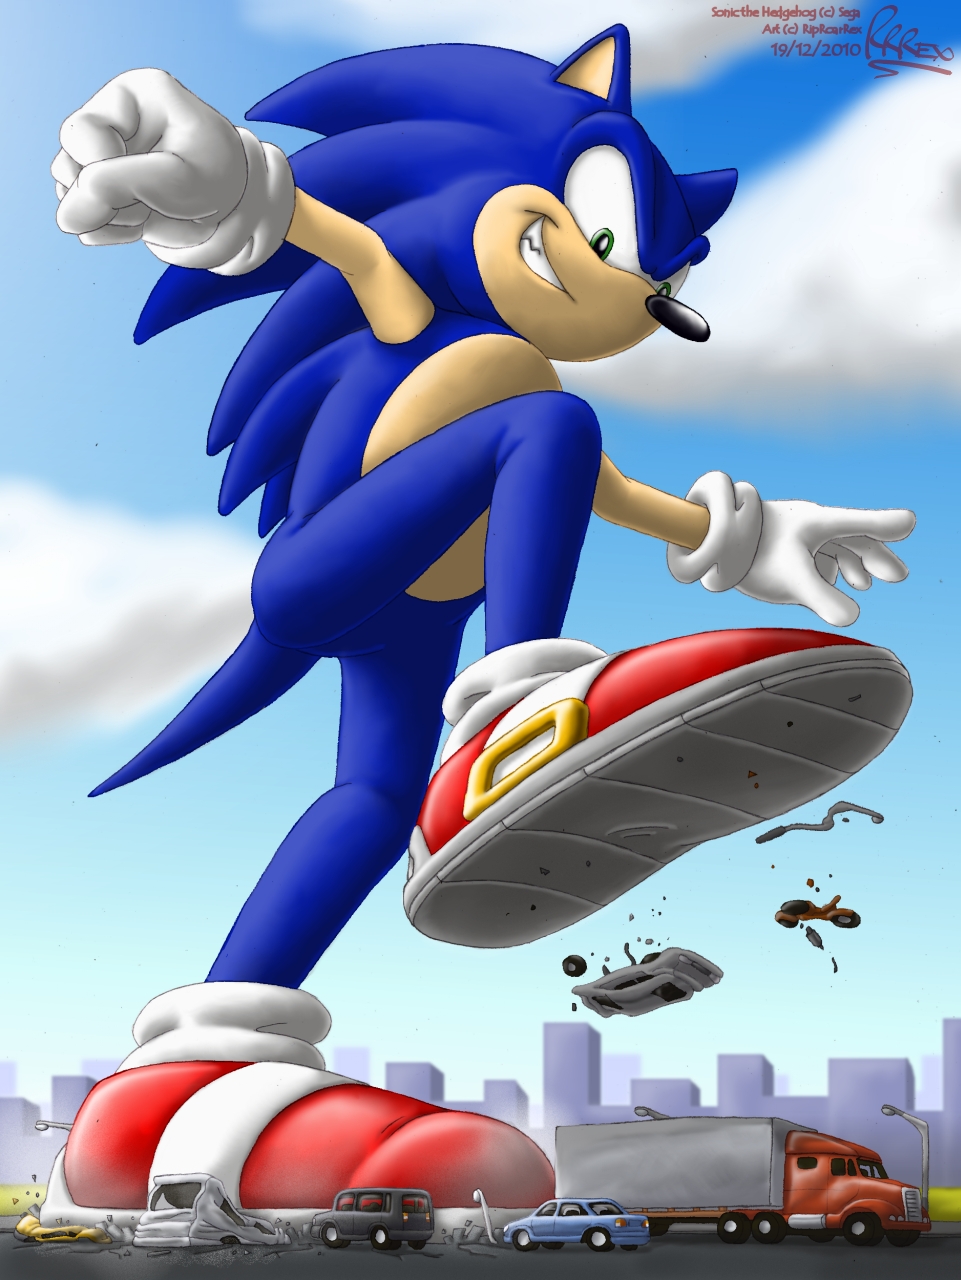 Giant Sonic The Hedgehog Feet All in one Photos.